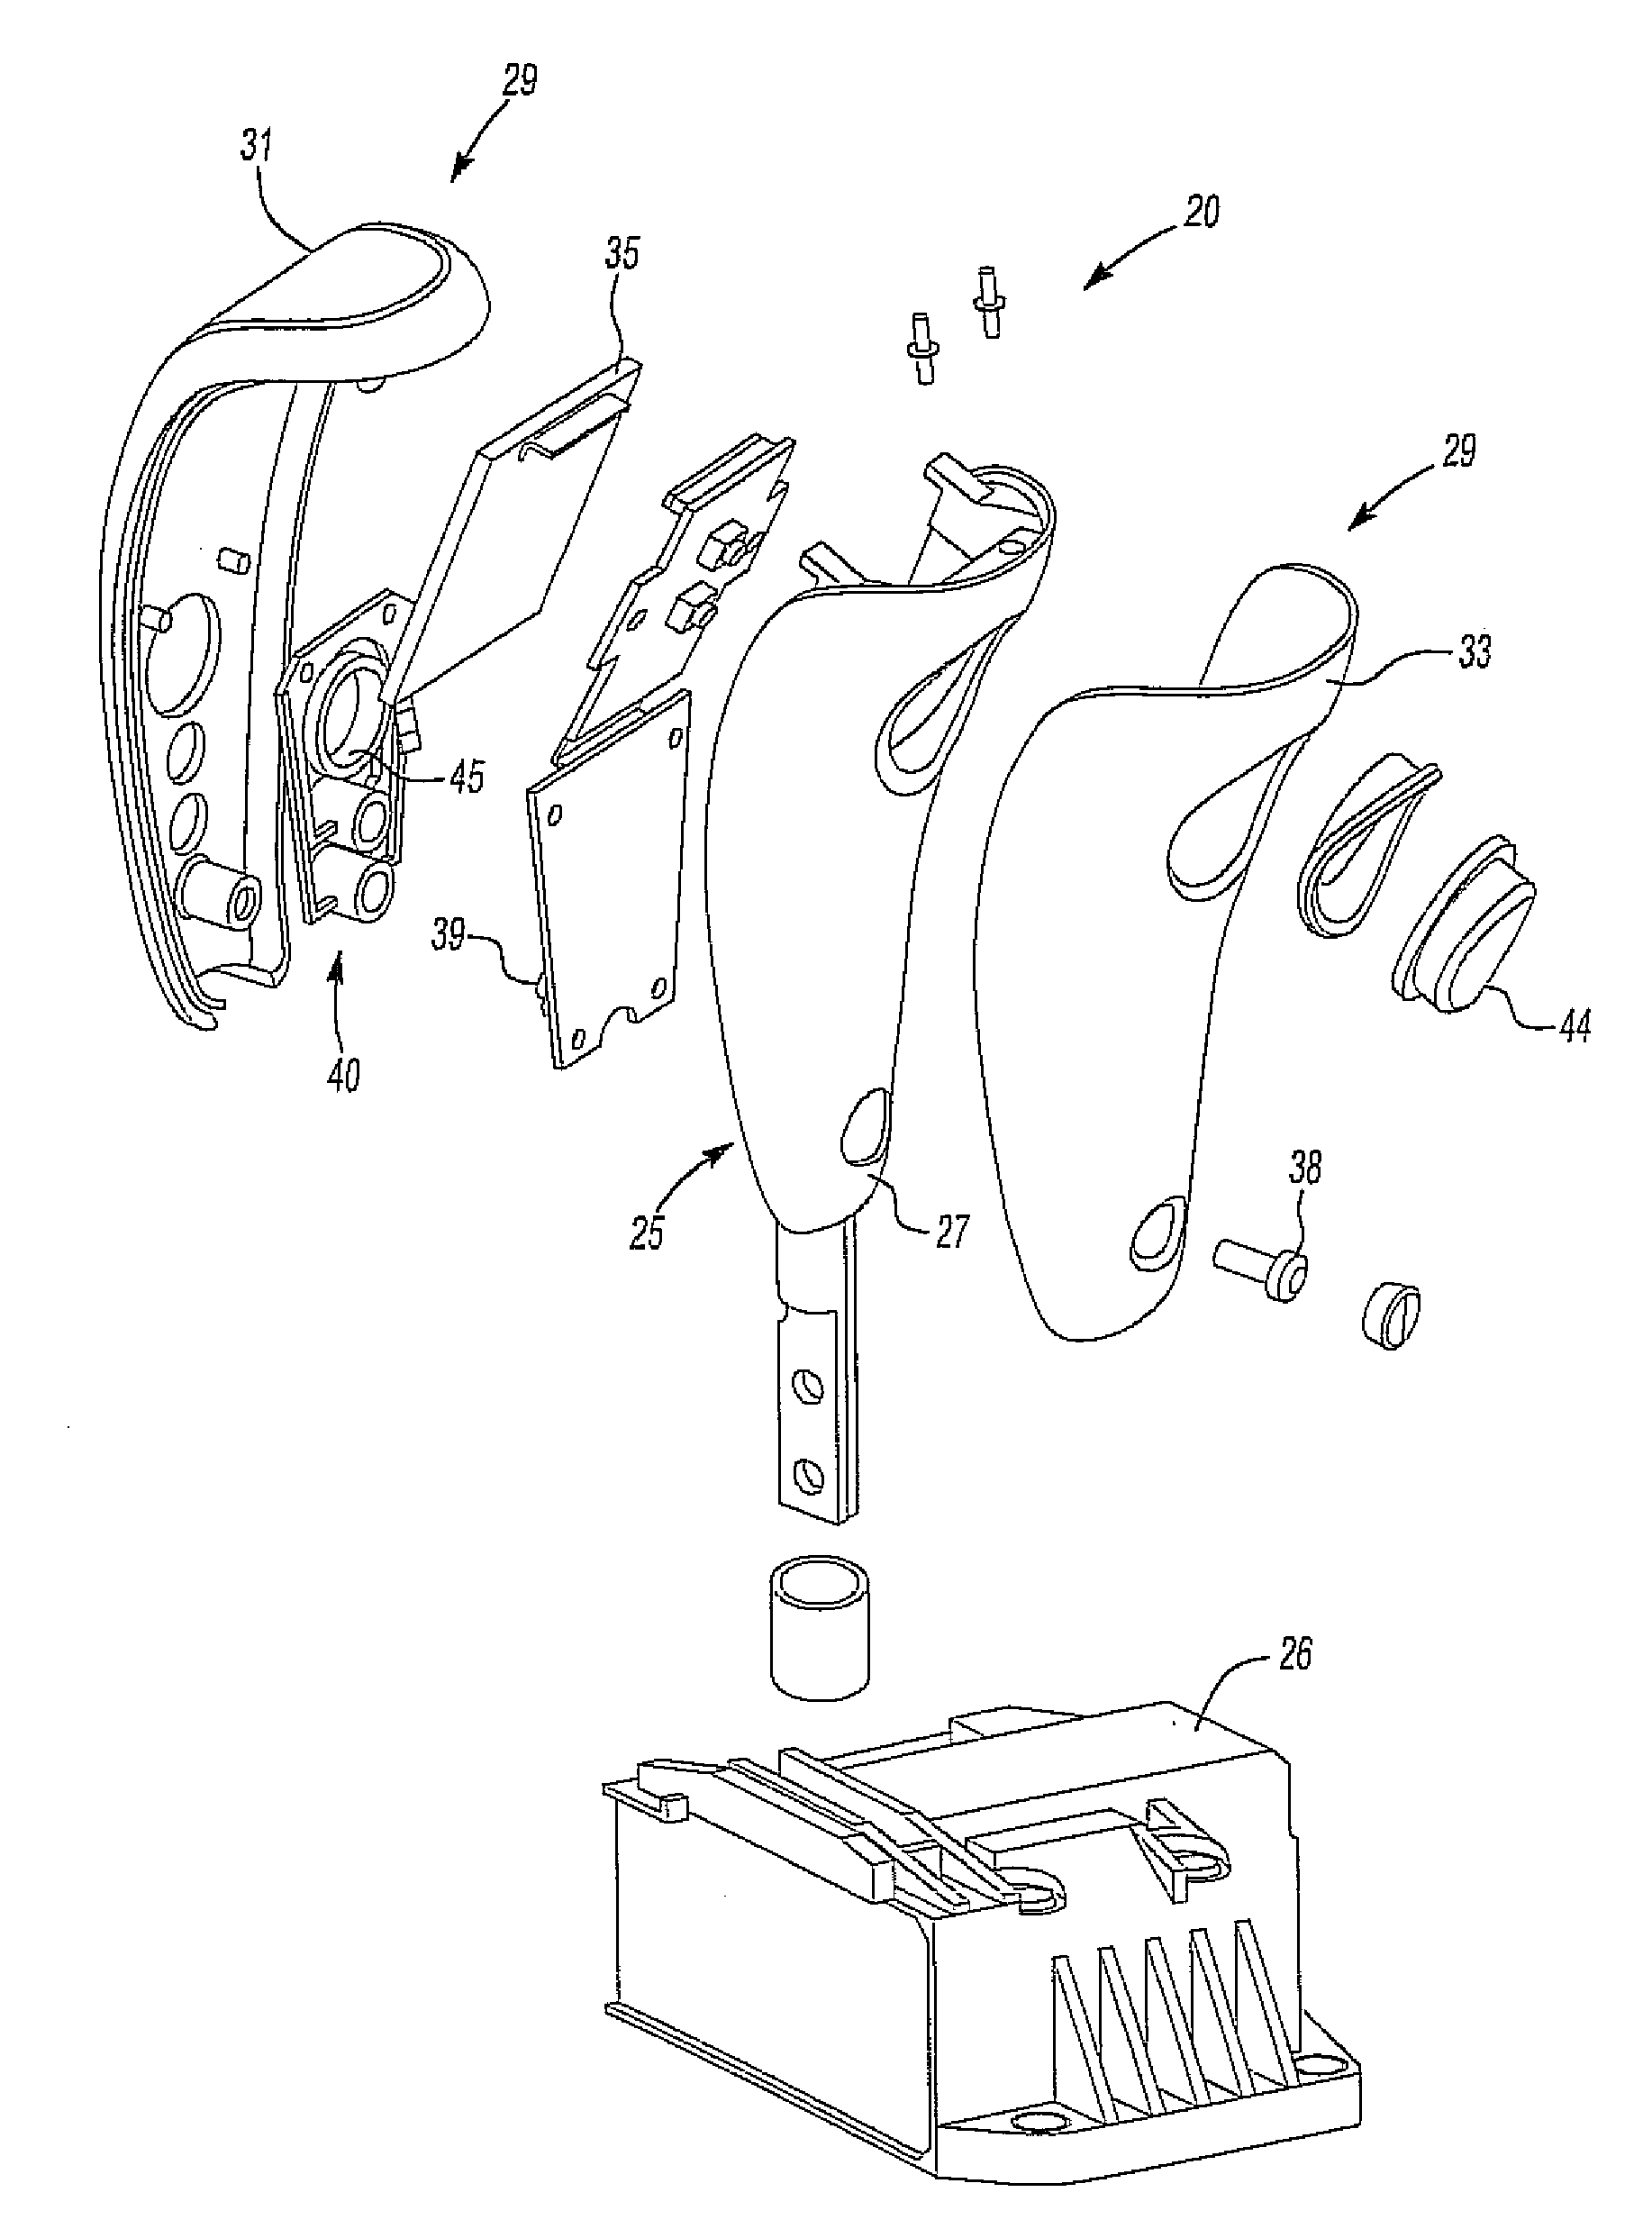 Shifter assembly including display and actuation for driver control